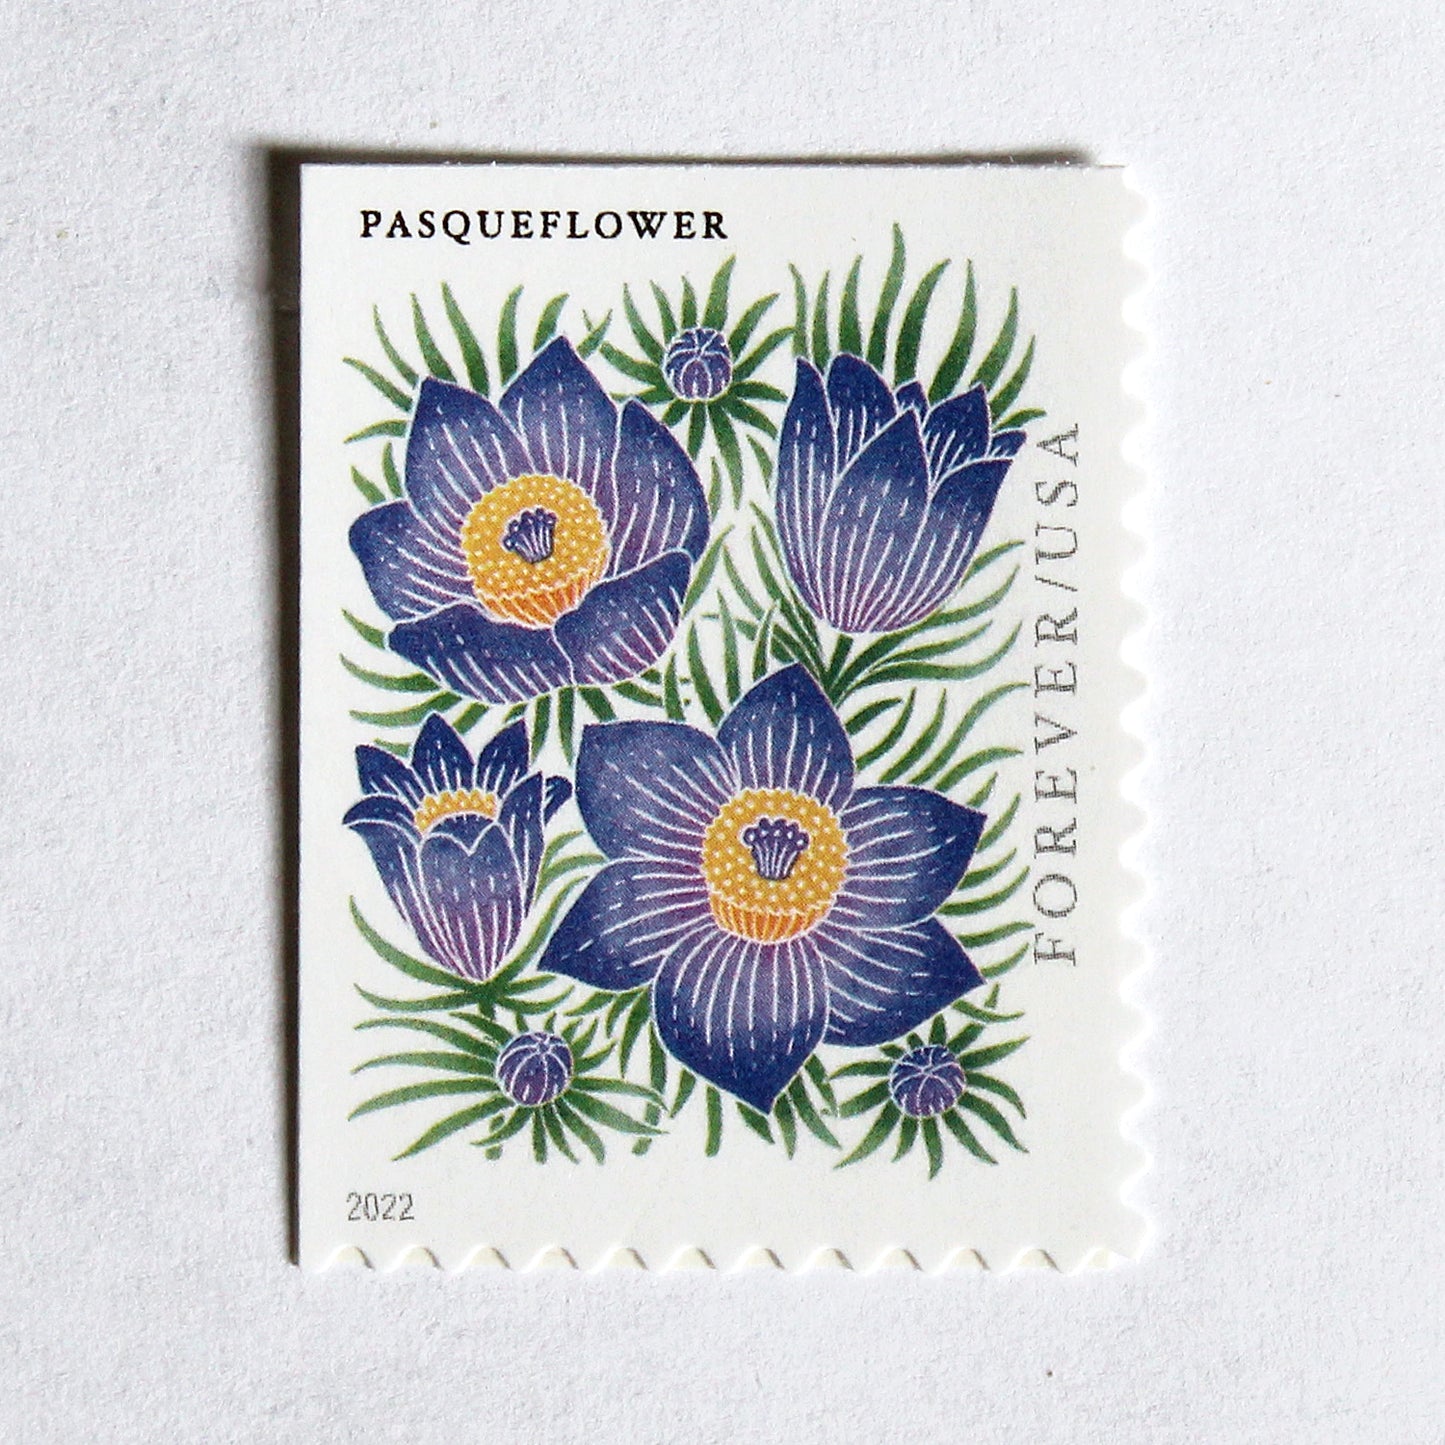 Pasqueflower Forever Stamps .. Unused US Postage Stamps .. Pack of 10